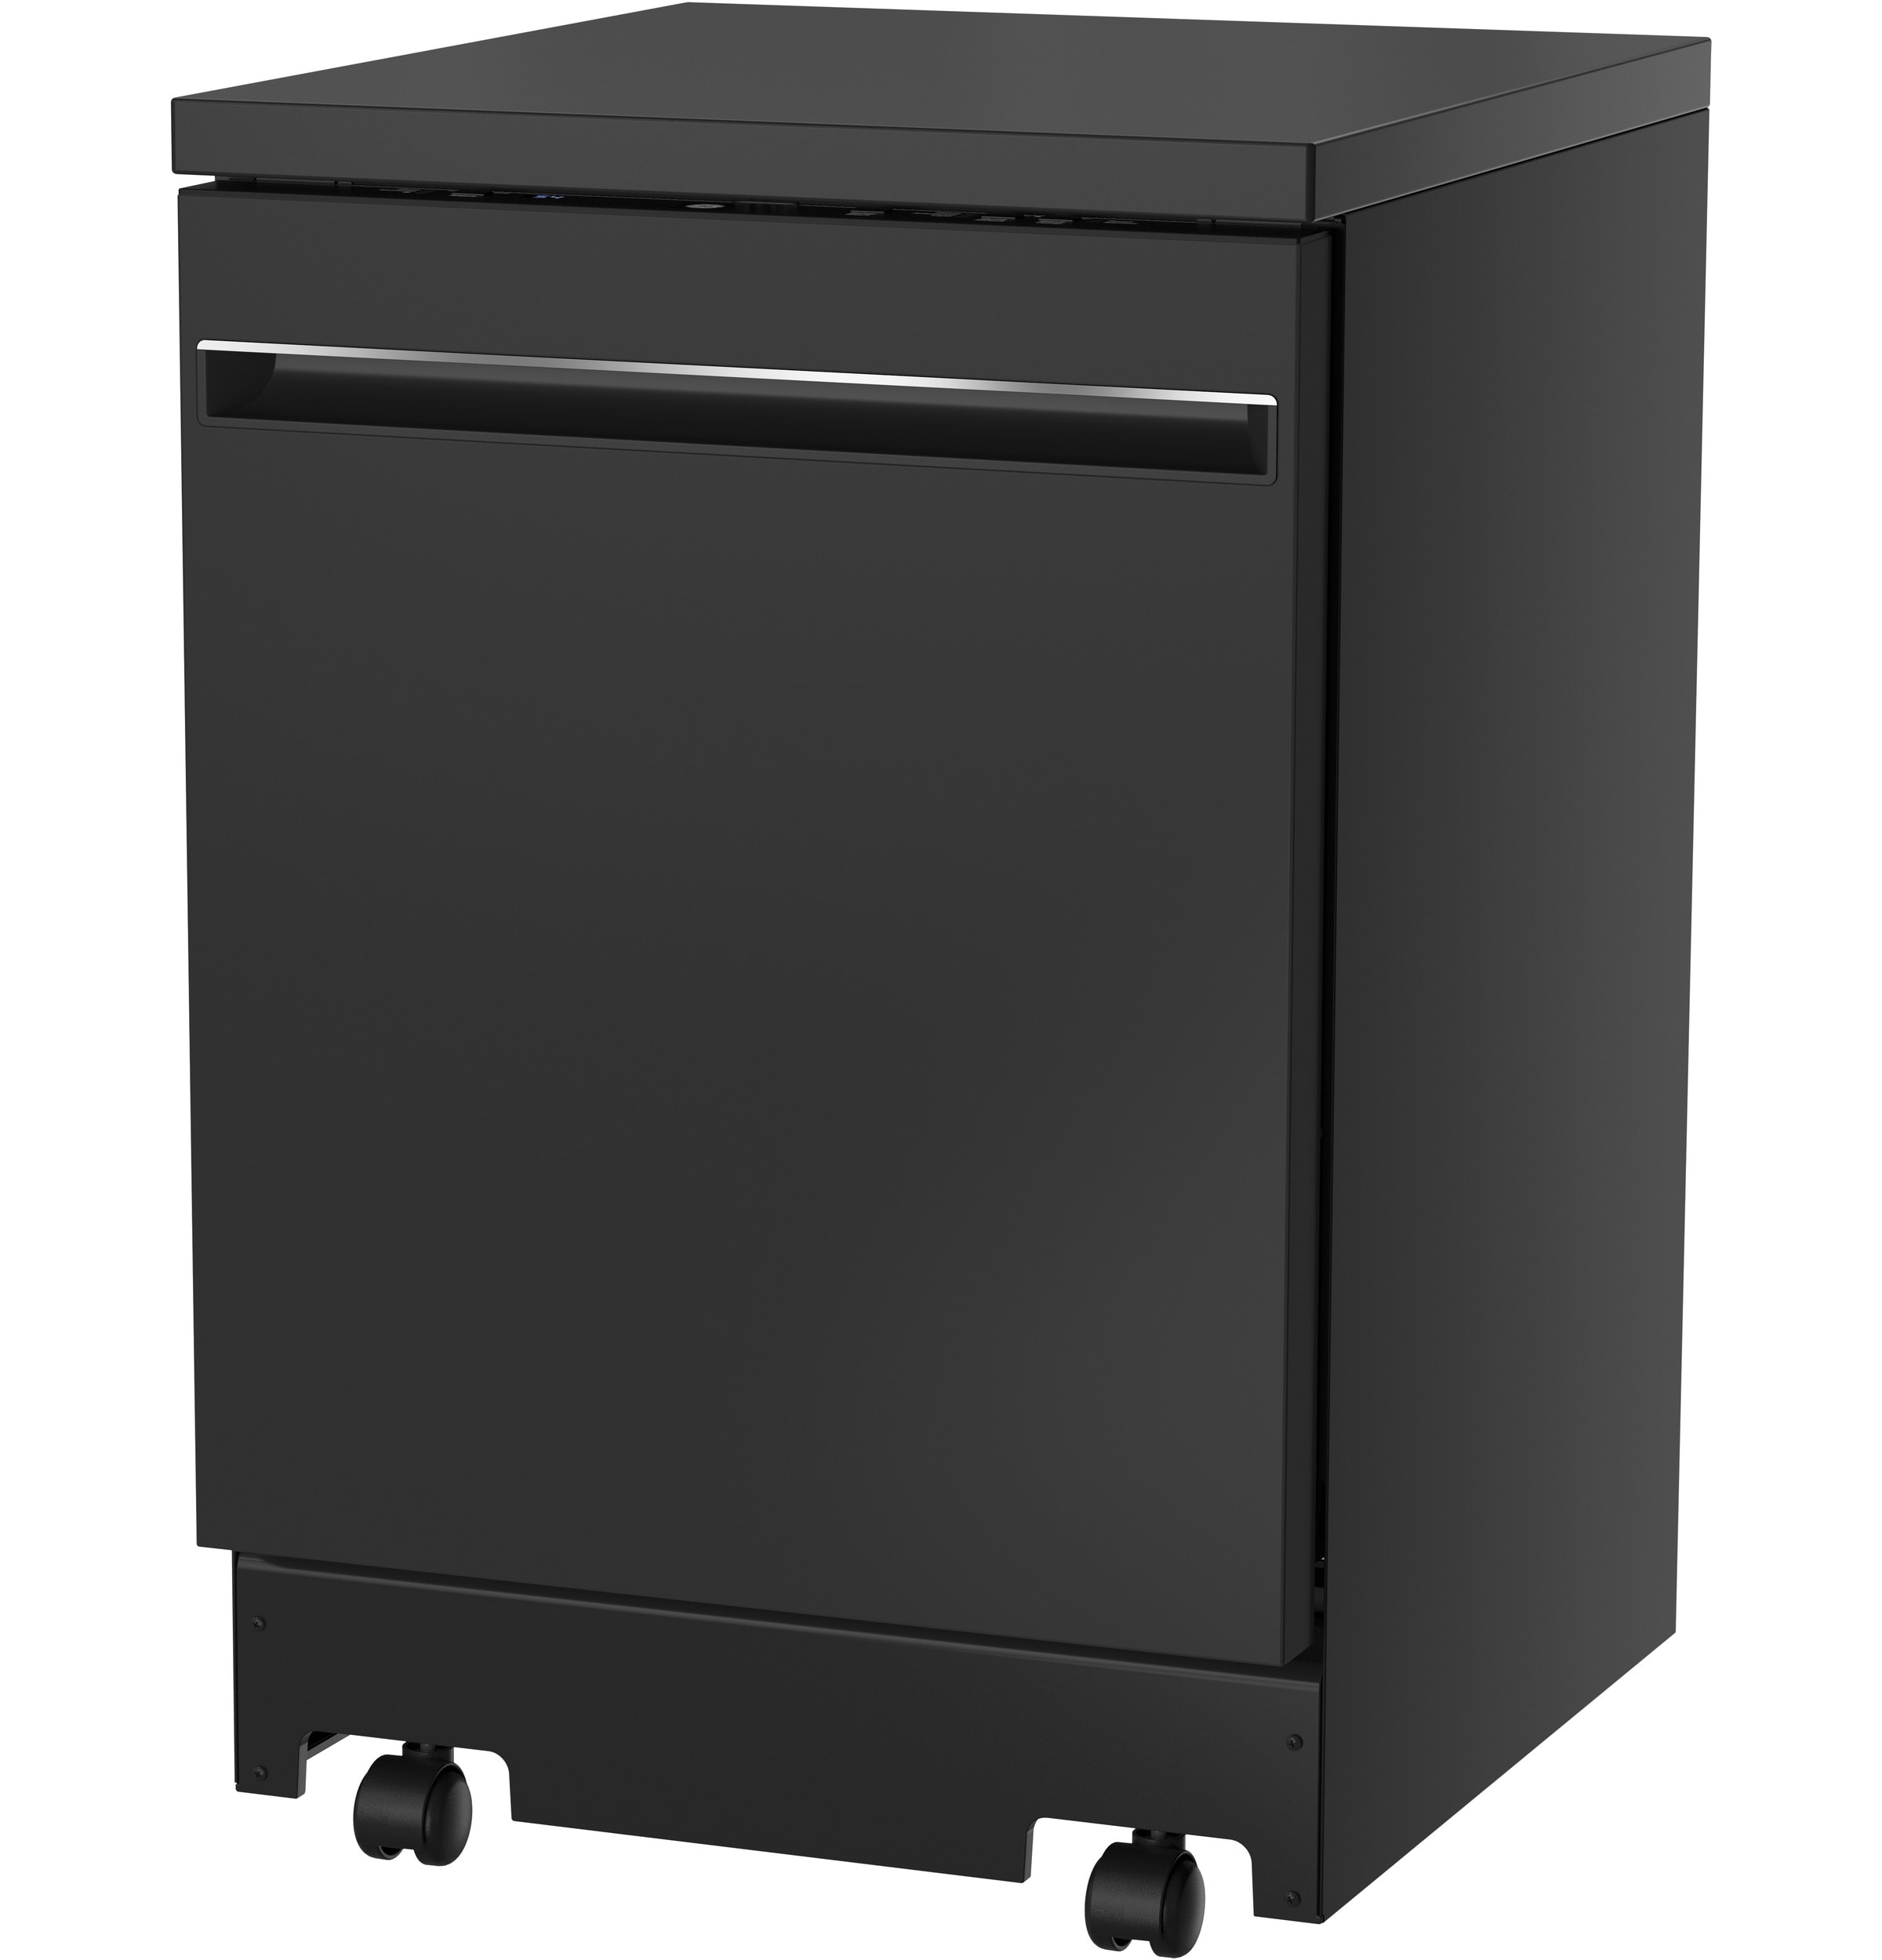 Comfee 21.6-in Portable Countertop Dishwasher (Black) ENERGY STAR, 49-dBA  in the Portable Dishwashers department at